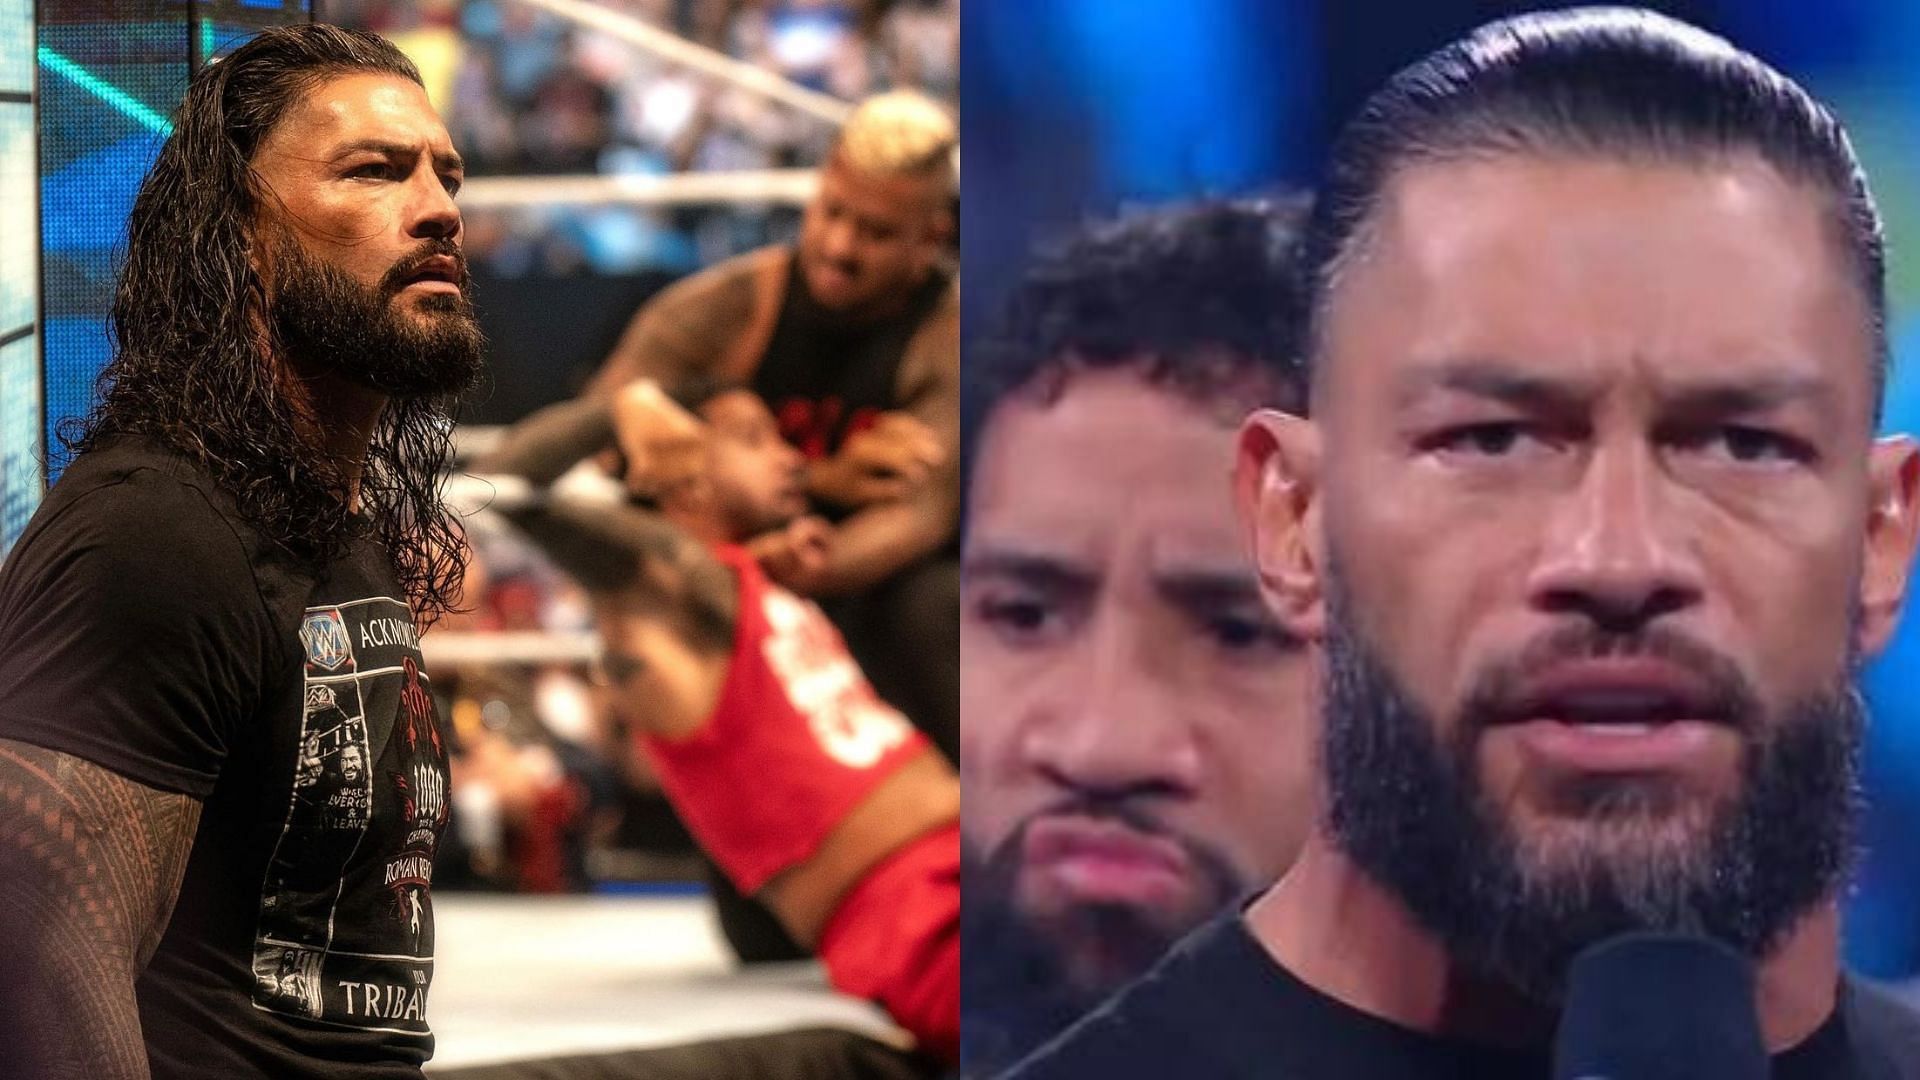 Roman Reigns and The Bloodline took out The Usos on SmackDown